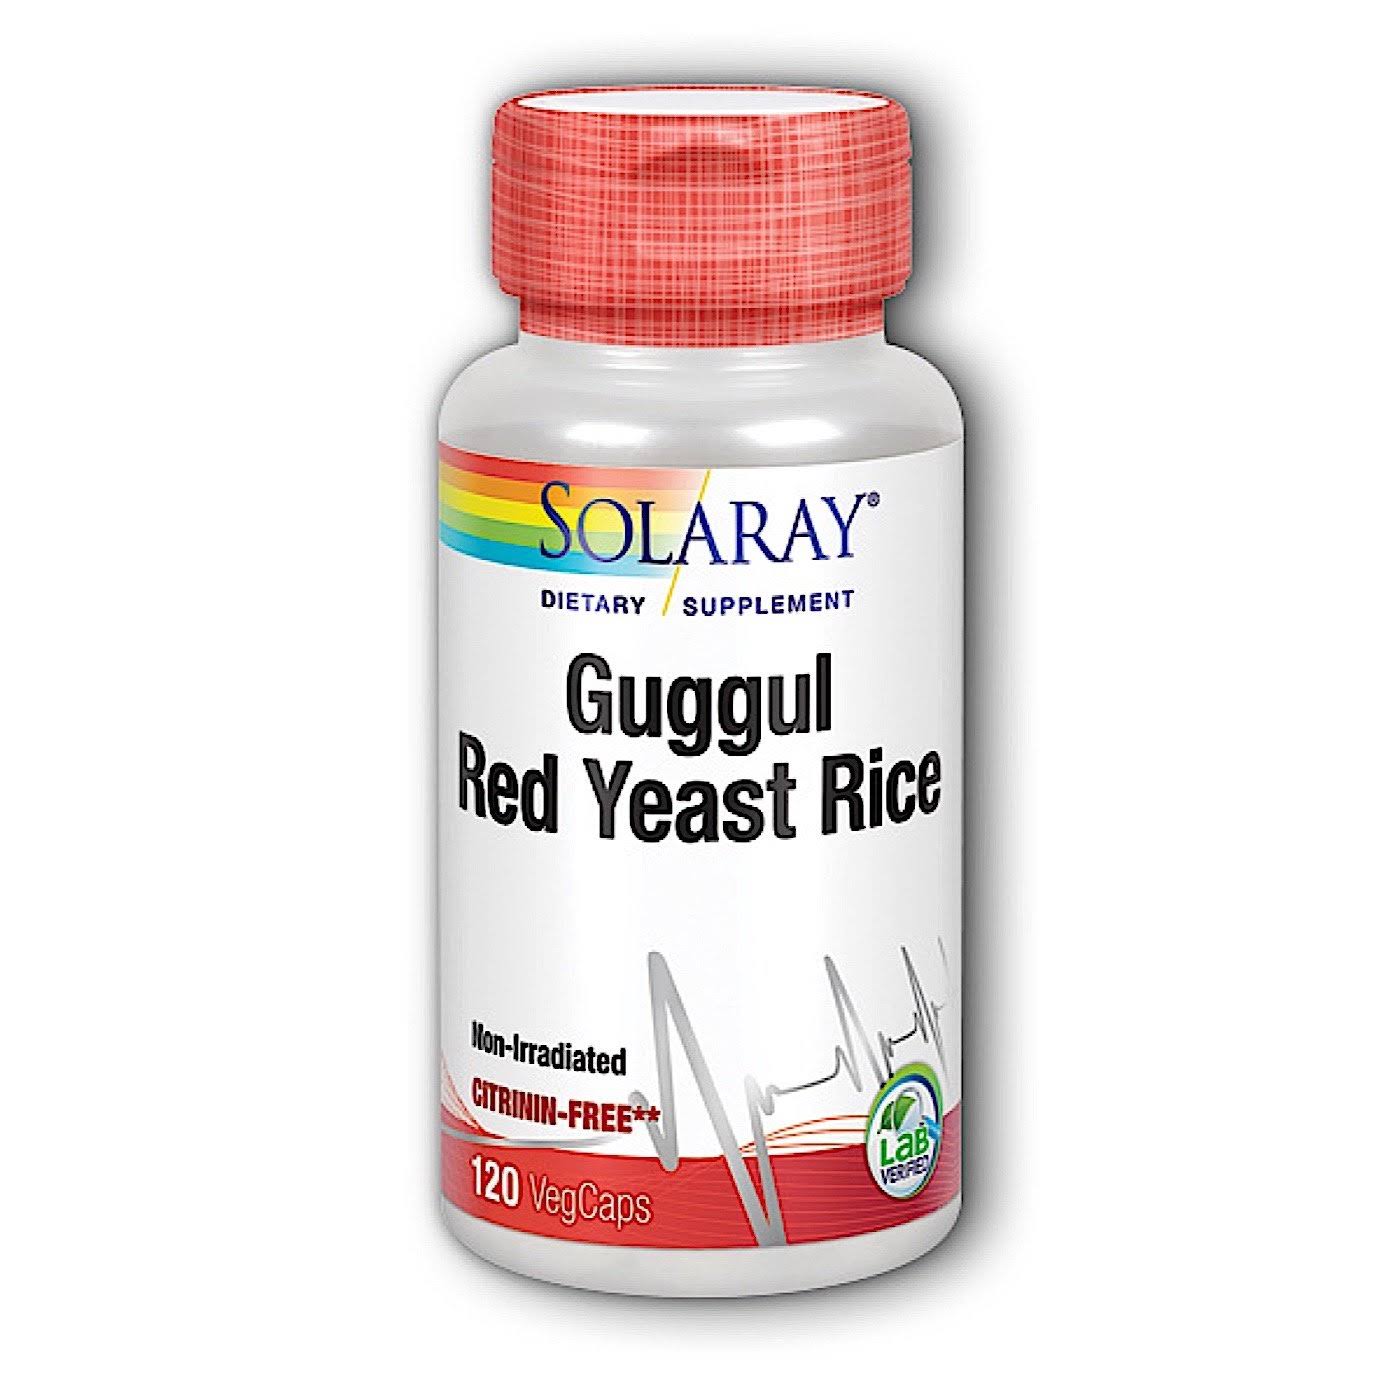 Solaray Guggul and Red Yeast Rice Dietary Supplement - 120 Capsules